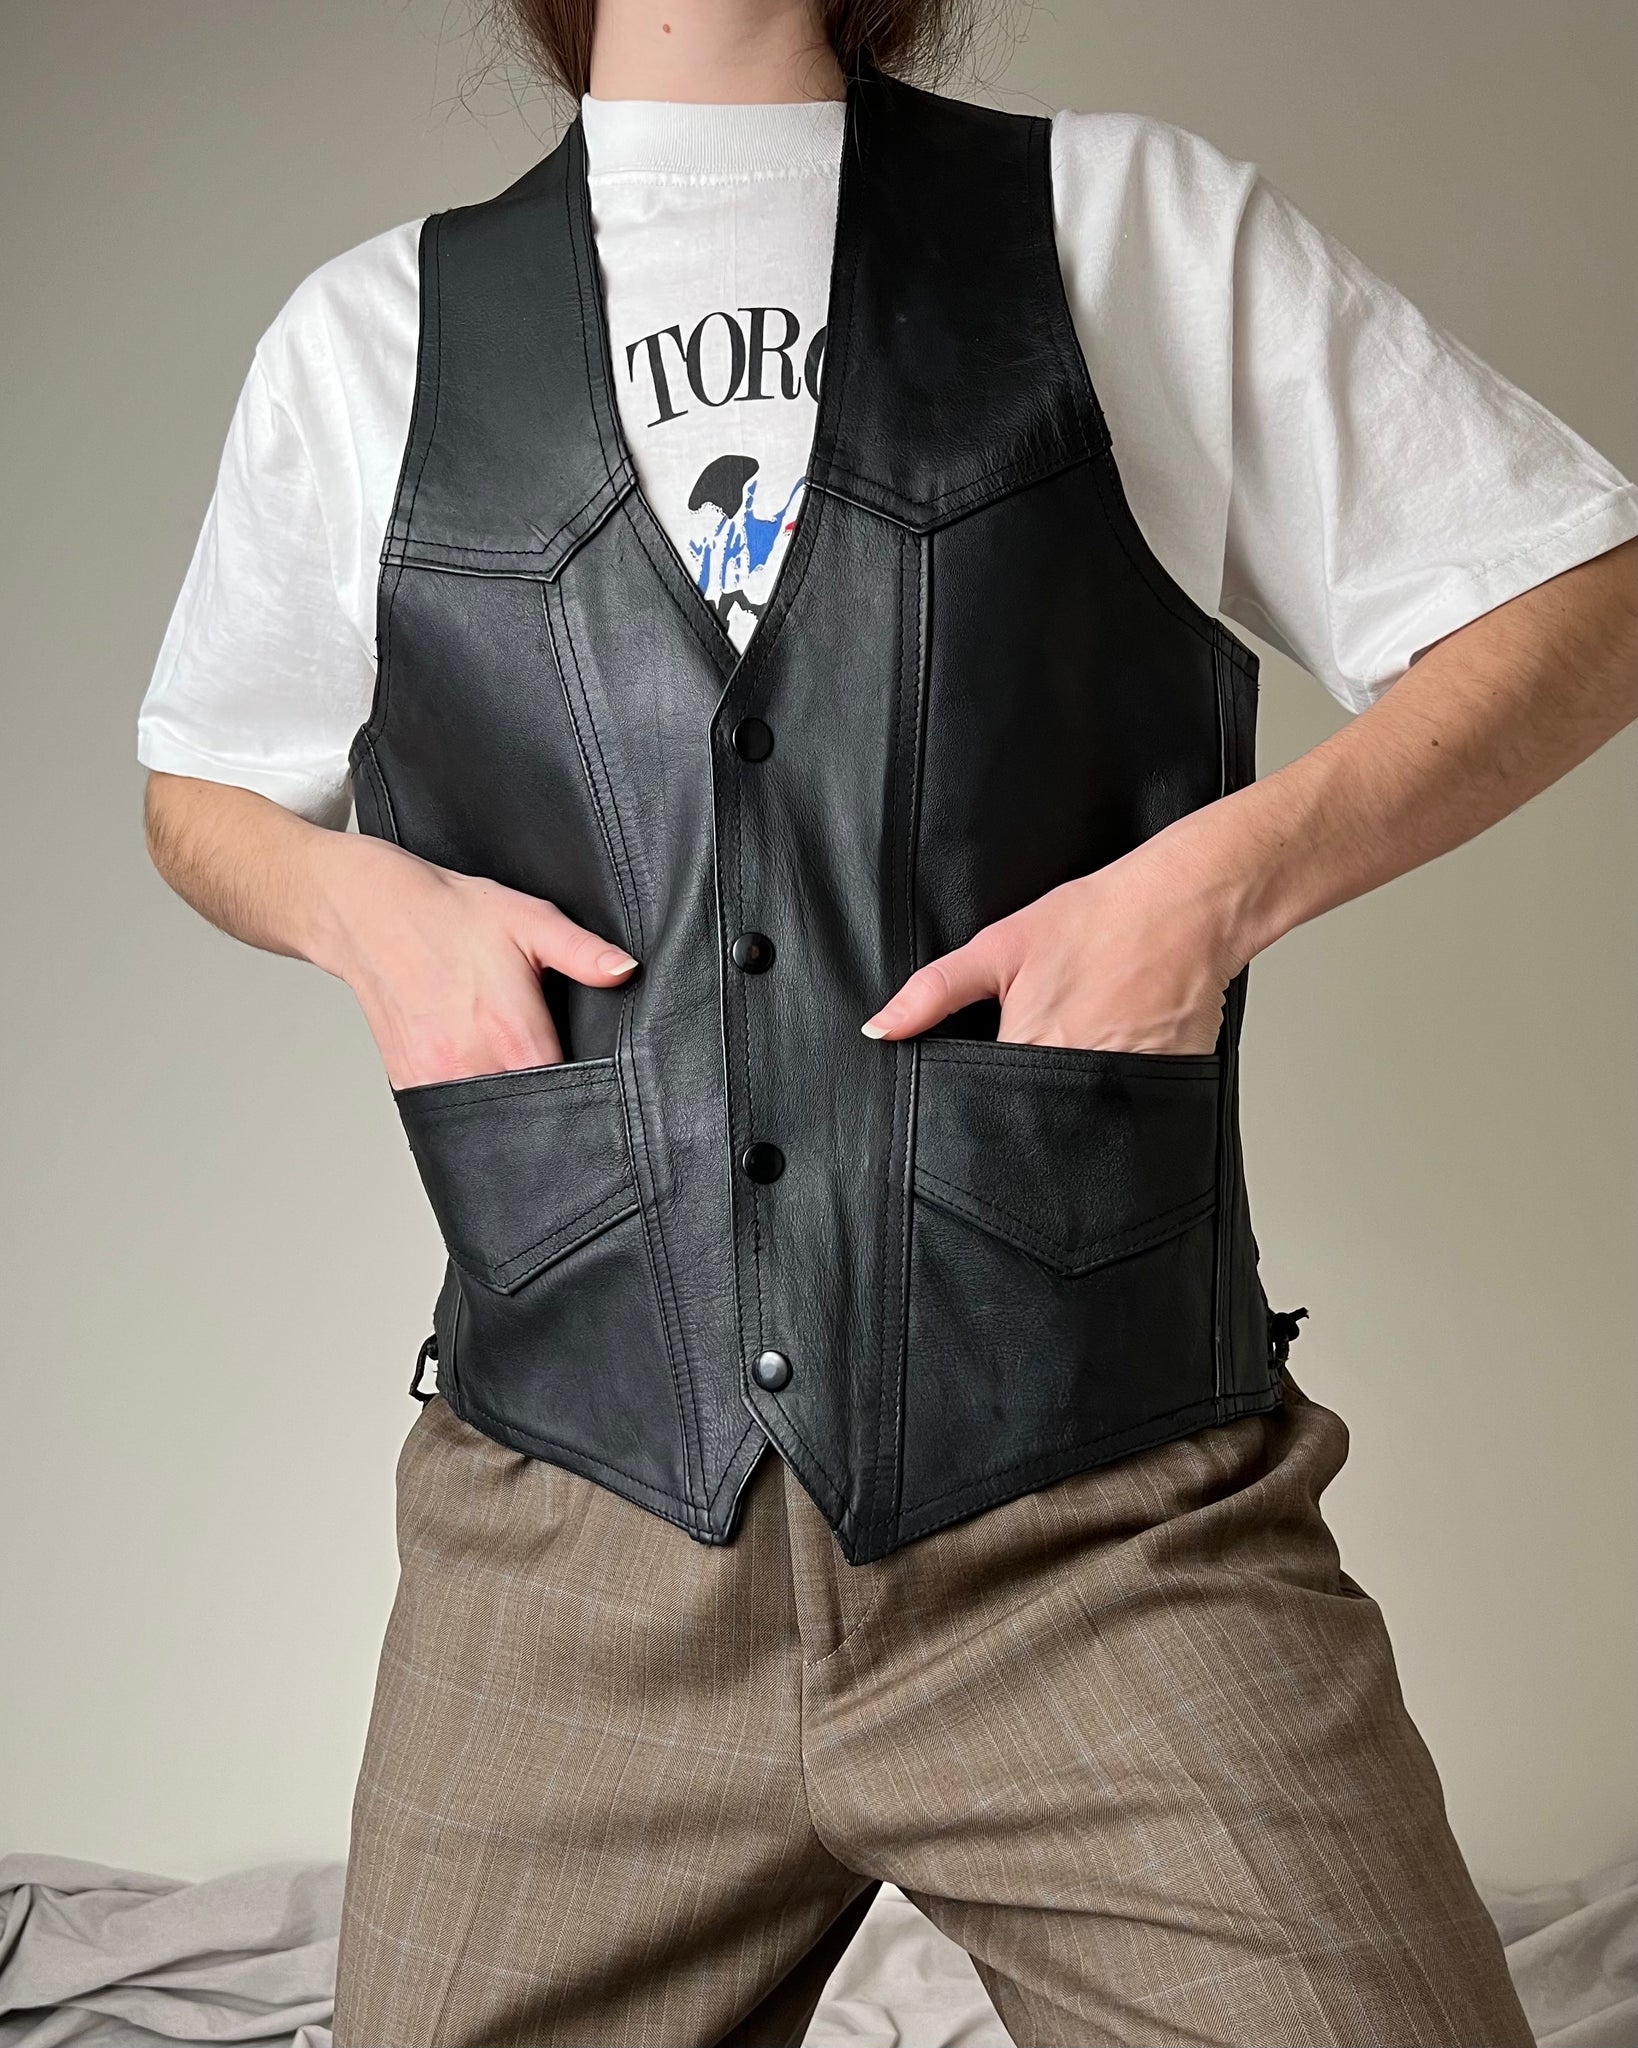 Black Leather Vest with Laced-up Sides (Mens S)